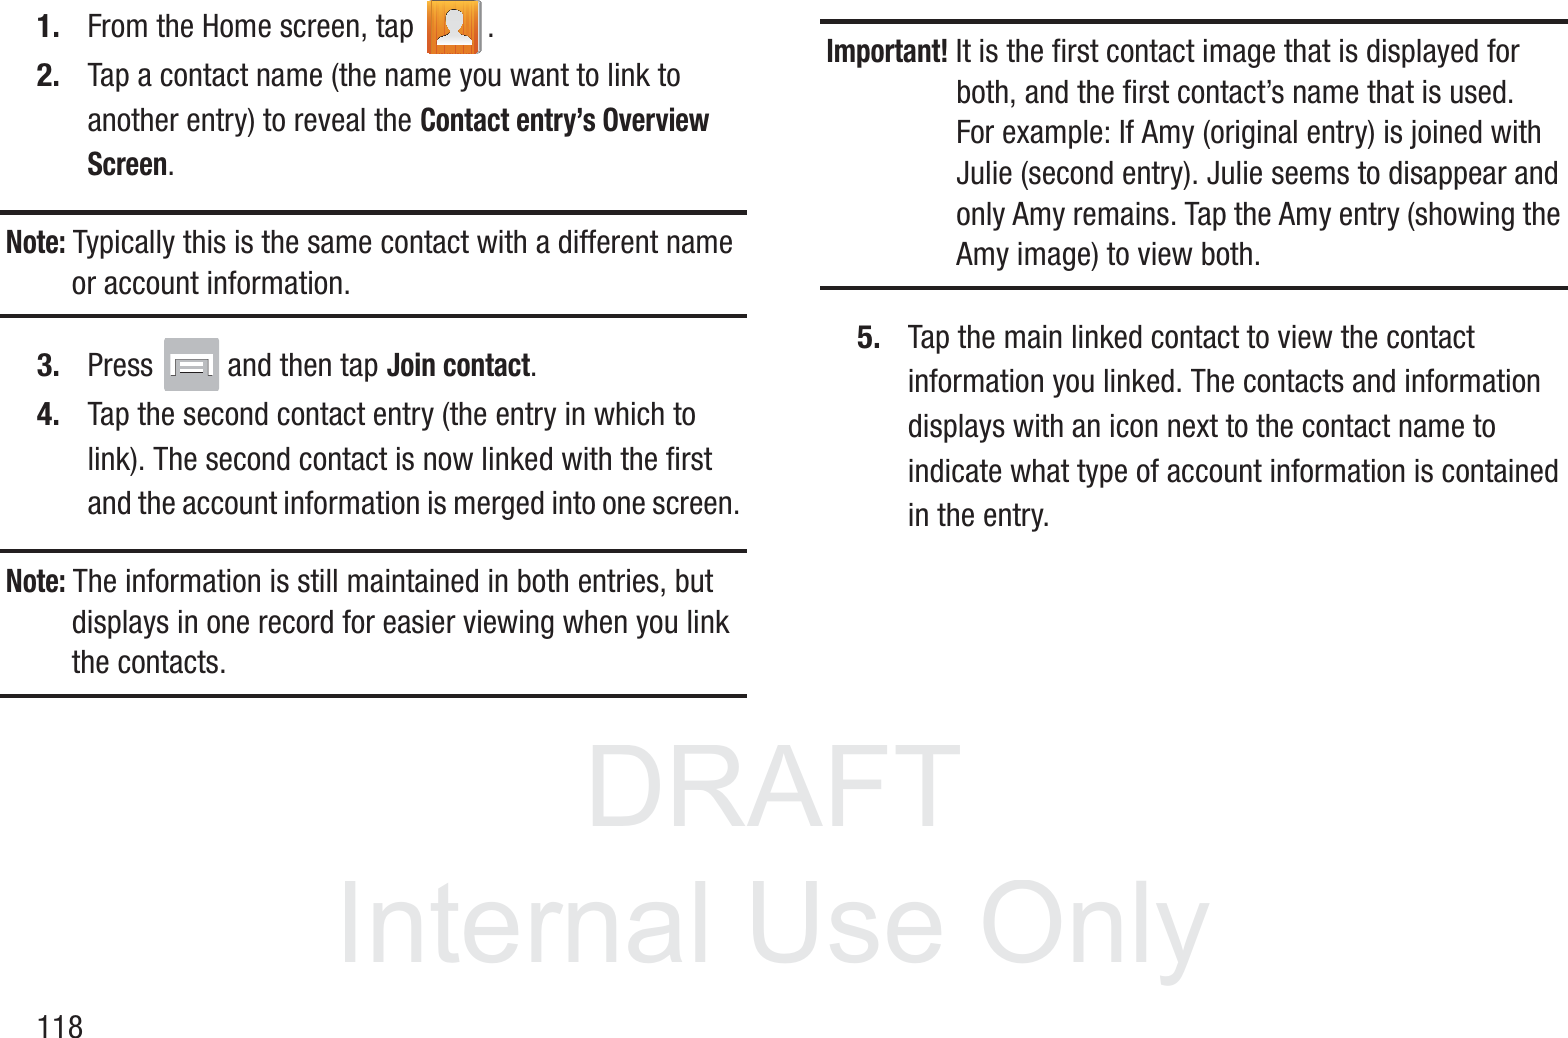 DRAFT InternalUse Only1181. From the Home screen, tap  .2. Tap a contact name (the name you want to link to another entry) to reveal the Contact entry’s Overview Screen.Note: Typically this is the same contact with a different name or account information.3. Press   and then tap Join contact.4. Tap the second contact entry (the entry in which to link). The second contact is now linked with the first and the account information is merged into one screen. Note: The information is still maintained in both entries, but displays in one record for easier viewing when you link the contacts.Important! It is the first contact image that is displayed for both, and the first contact’s name that is used.For example: If Amy (original entry) is joined with Julie (second entry). Julie seems to disappear and only Amy remains. Tap the Amy entry (showing the Amy image) to view both.5. Tap the main linked contact to view the contact information you linked. The contacts and information displays with an icon next to the contact name to indicate what type of account information is contained in the entry.